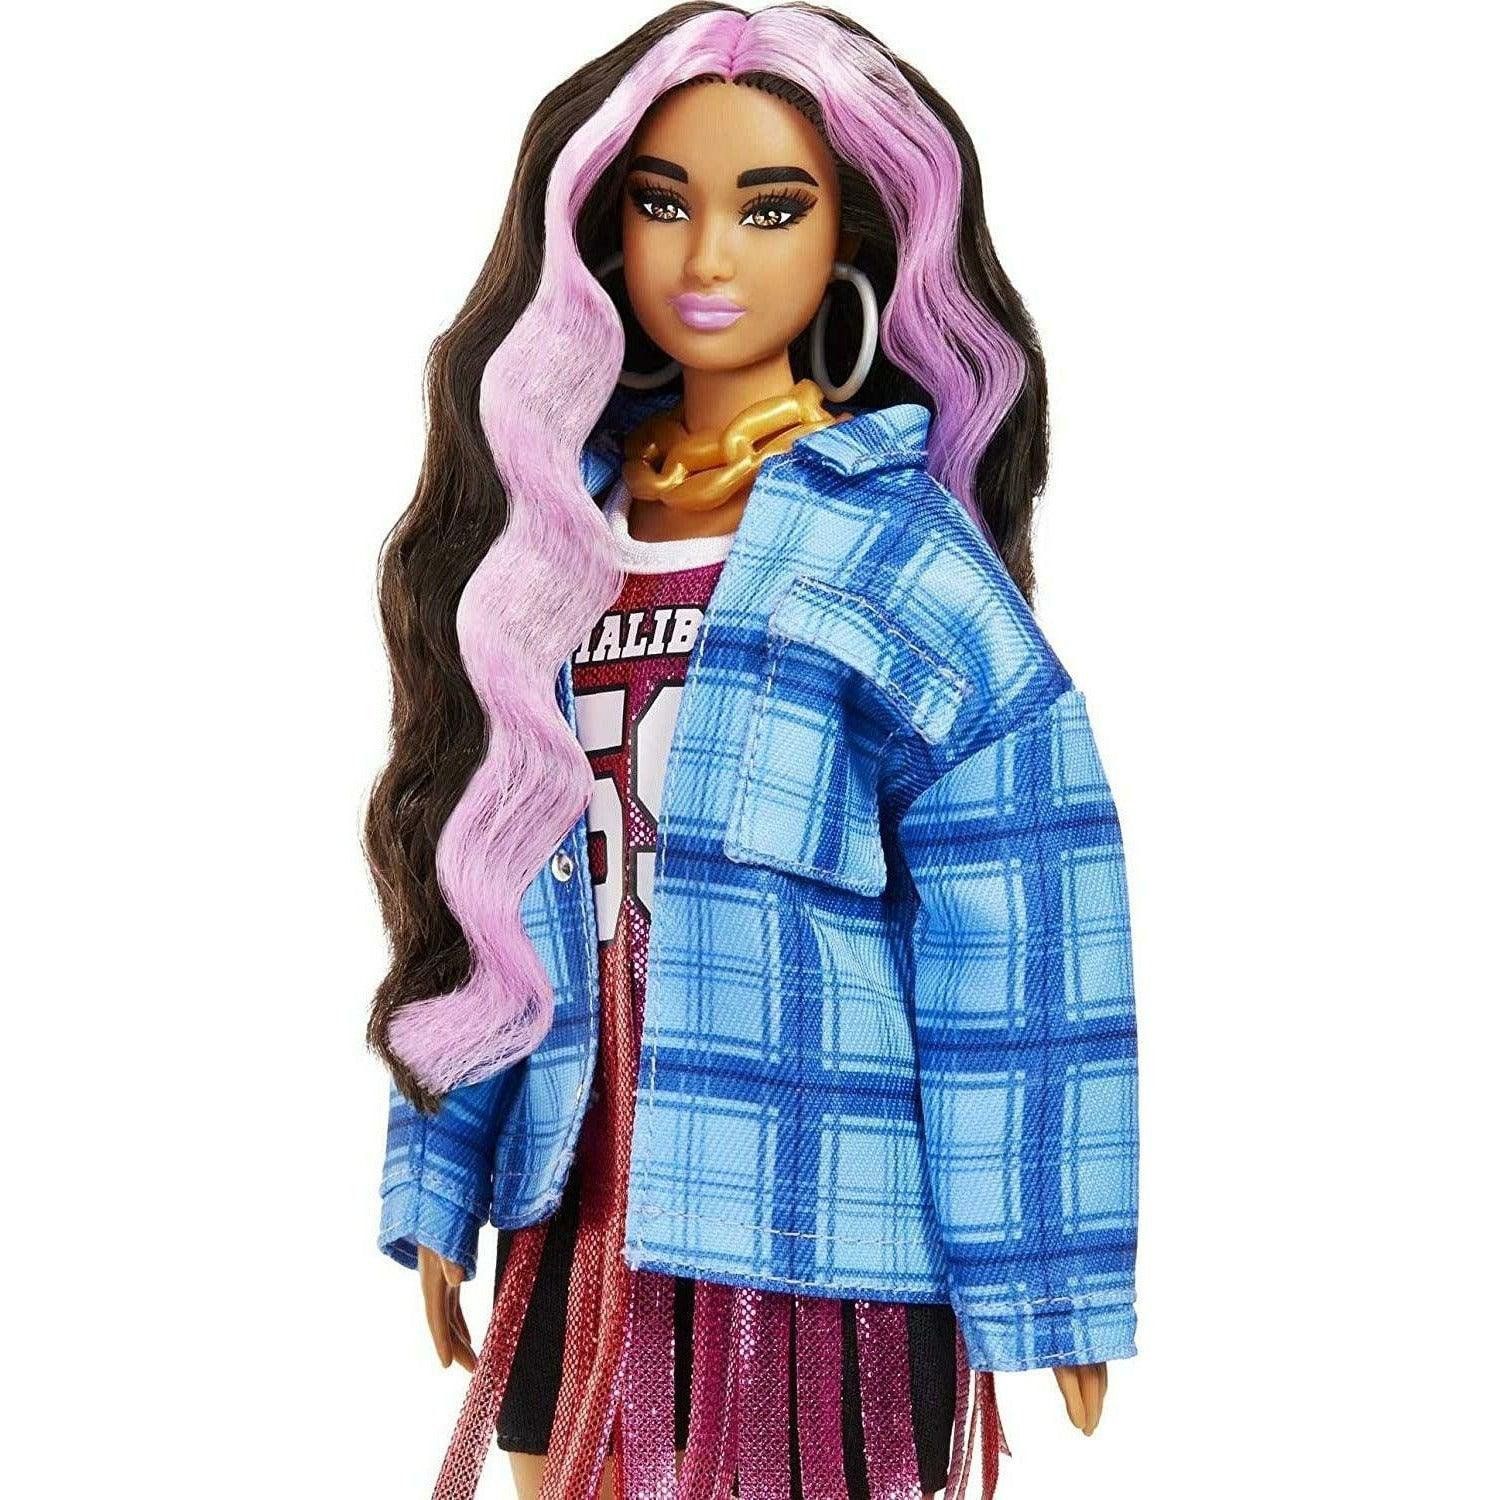 Barbie Extra Doll #13 in Basketball Jersey Dress & Accessories, with Pet Corgi, Extra-Long Crimped Hair with Pink Streaks - BumbleToys - 5-7 Years, Barbie, Dolls, Fashion Dolls & Accessories, Girls, OXE, Pre-Order